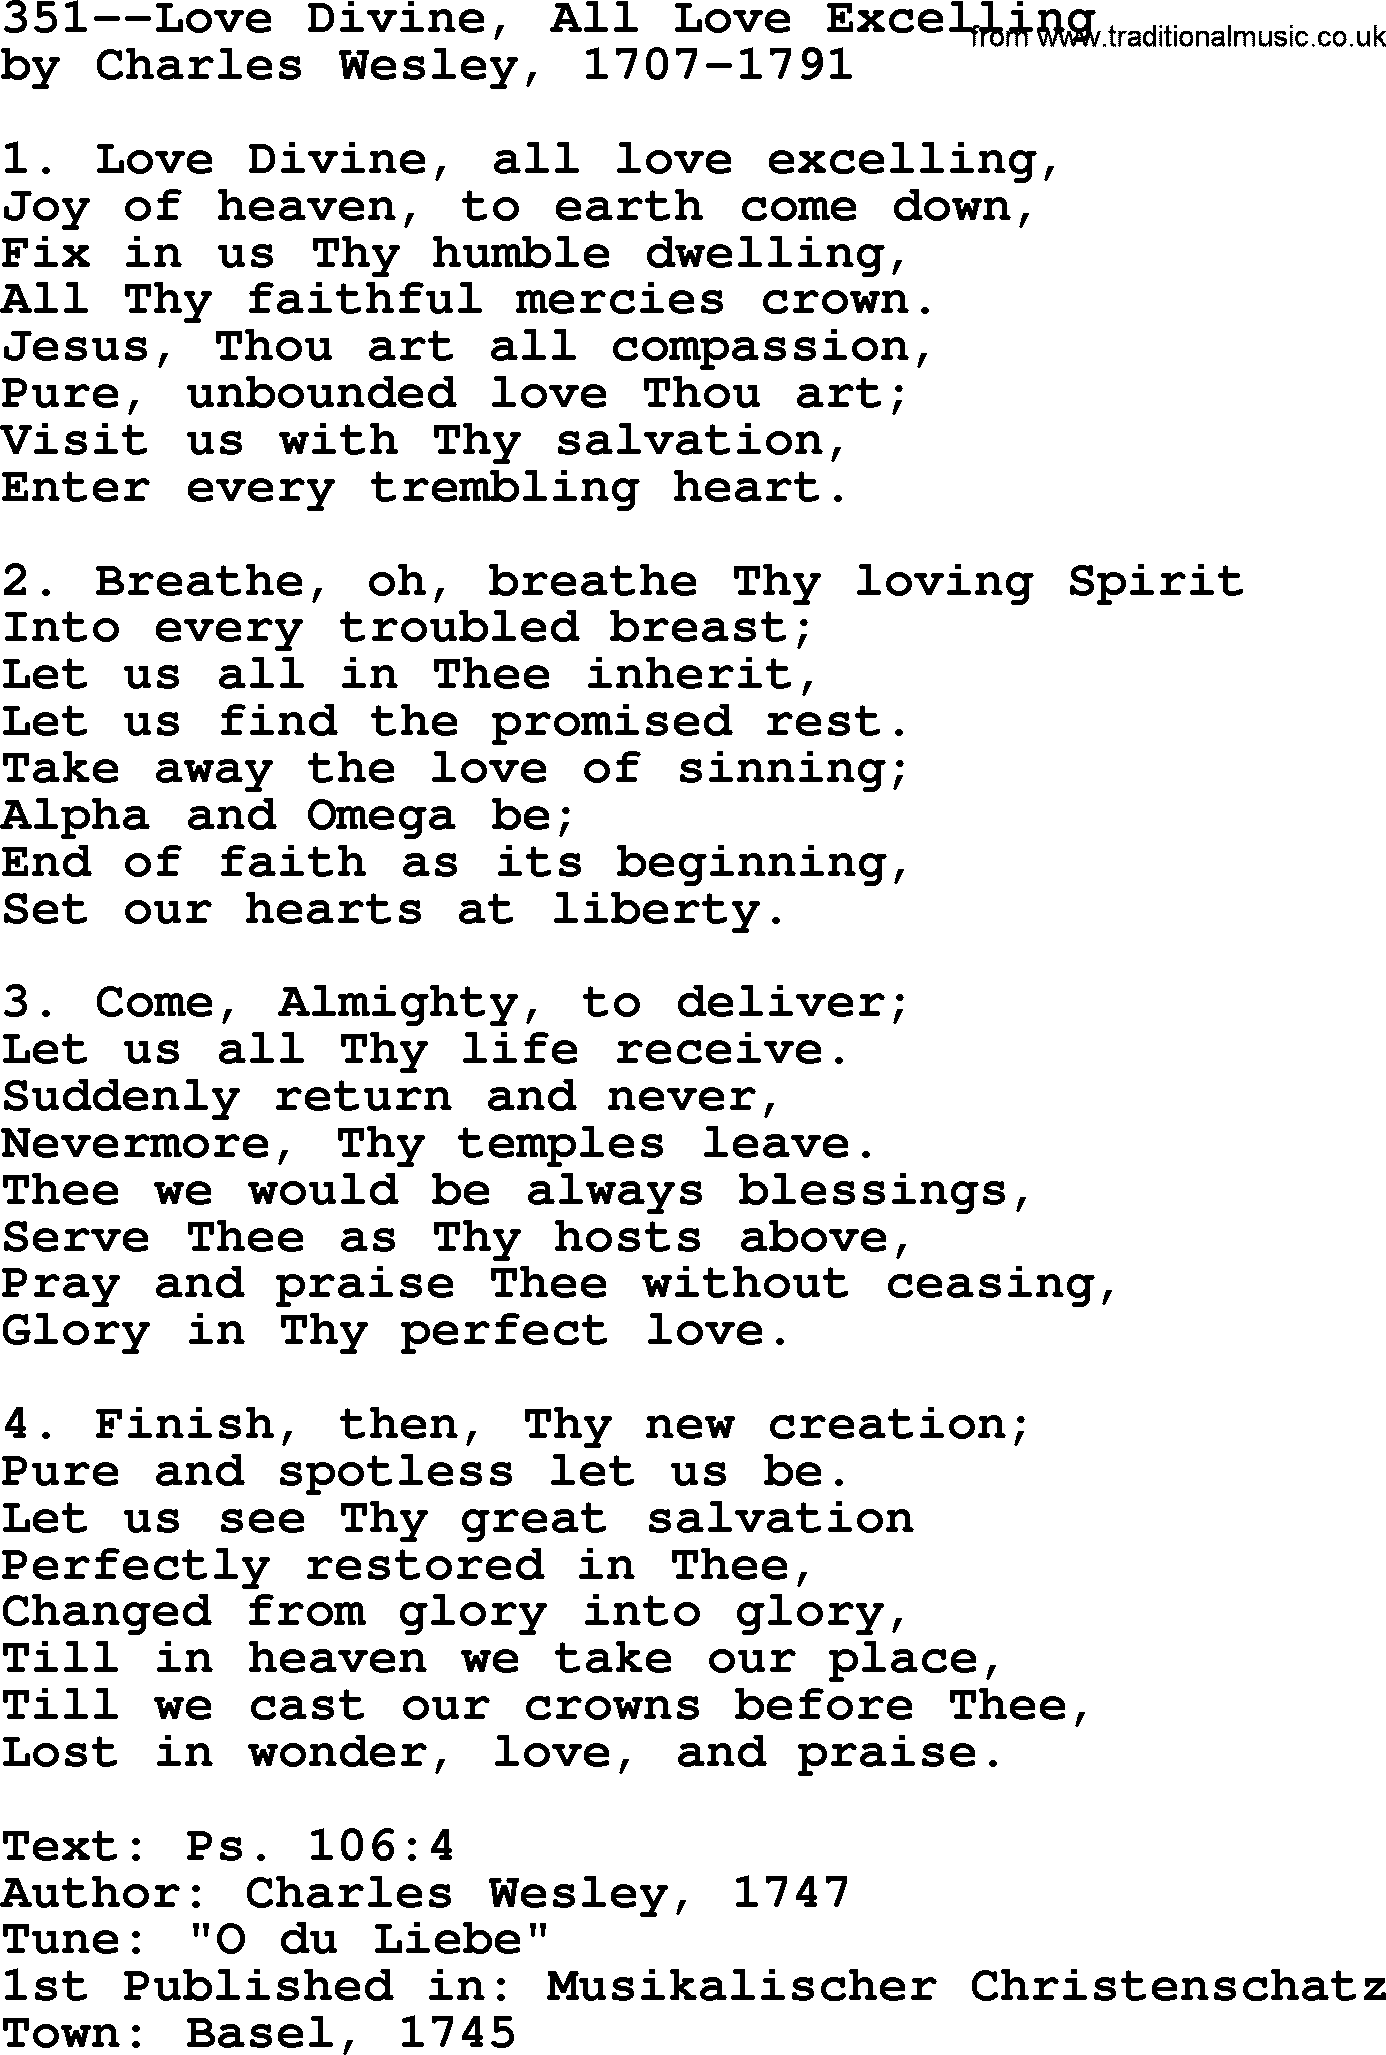 Lutheran Hymn: 351--Love Divine, All Love Excelling.txt lyrics with PDF